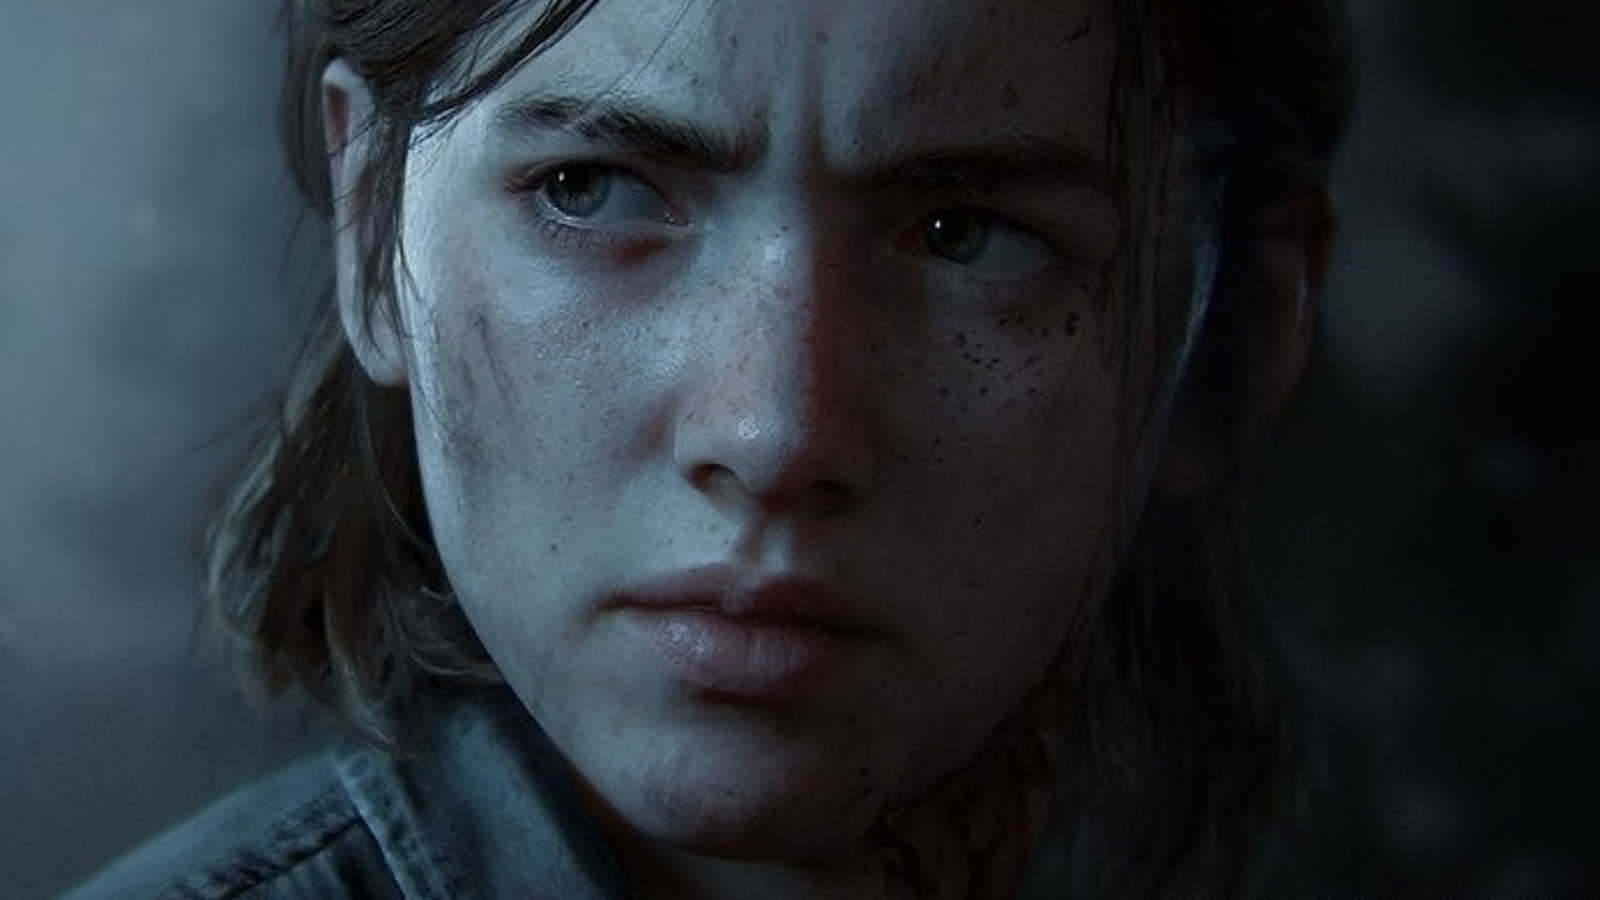 Naughty Dog says the preview/interview for Last of US from M!Games is not  accurate